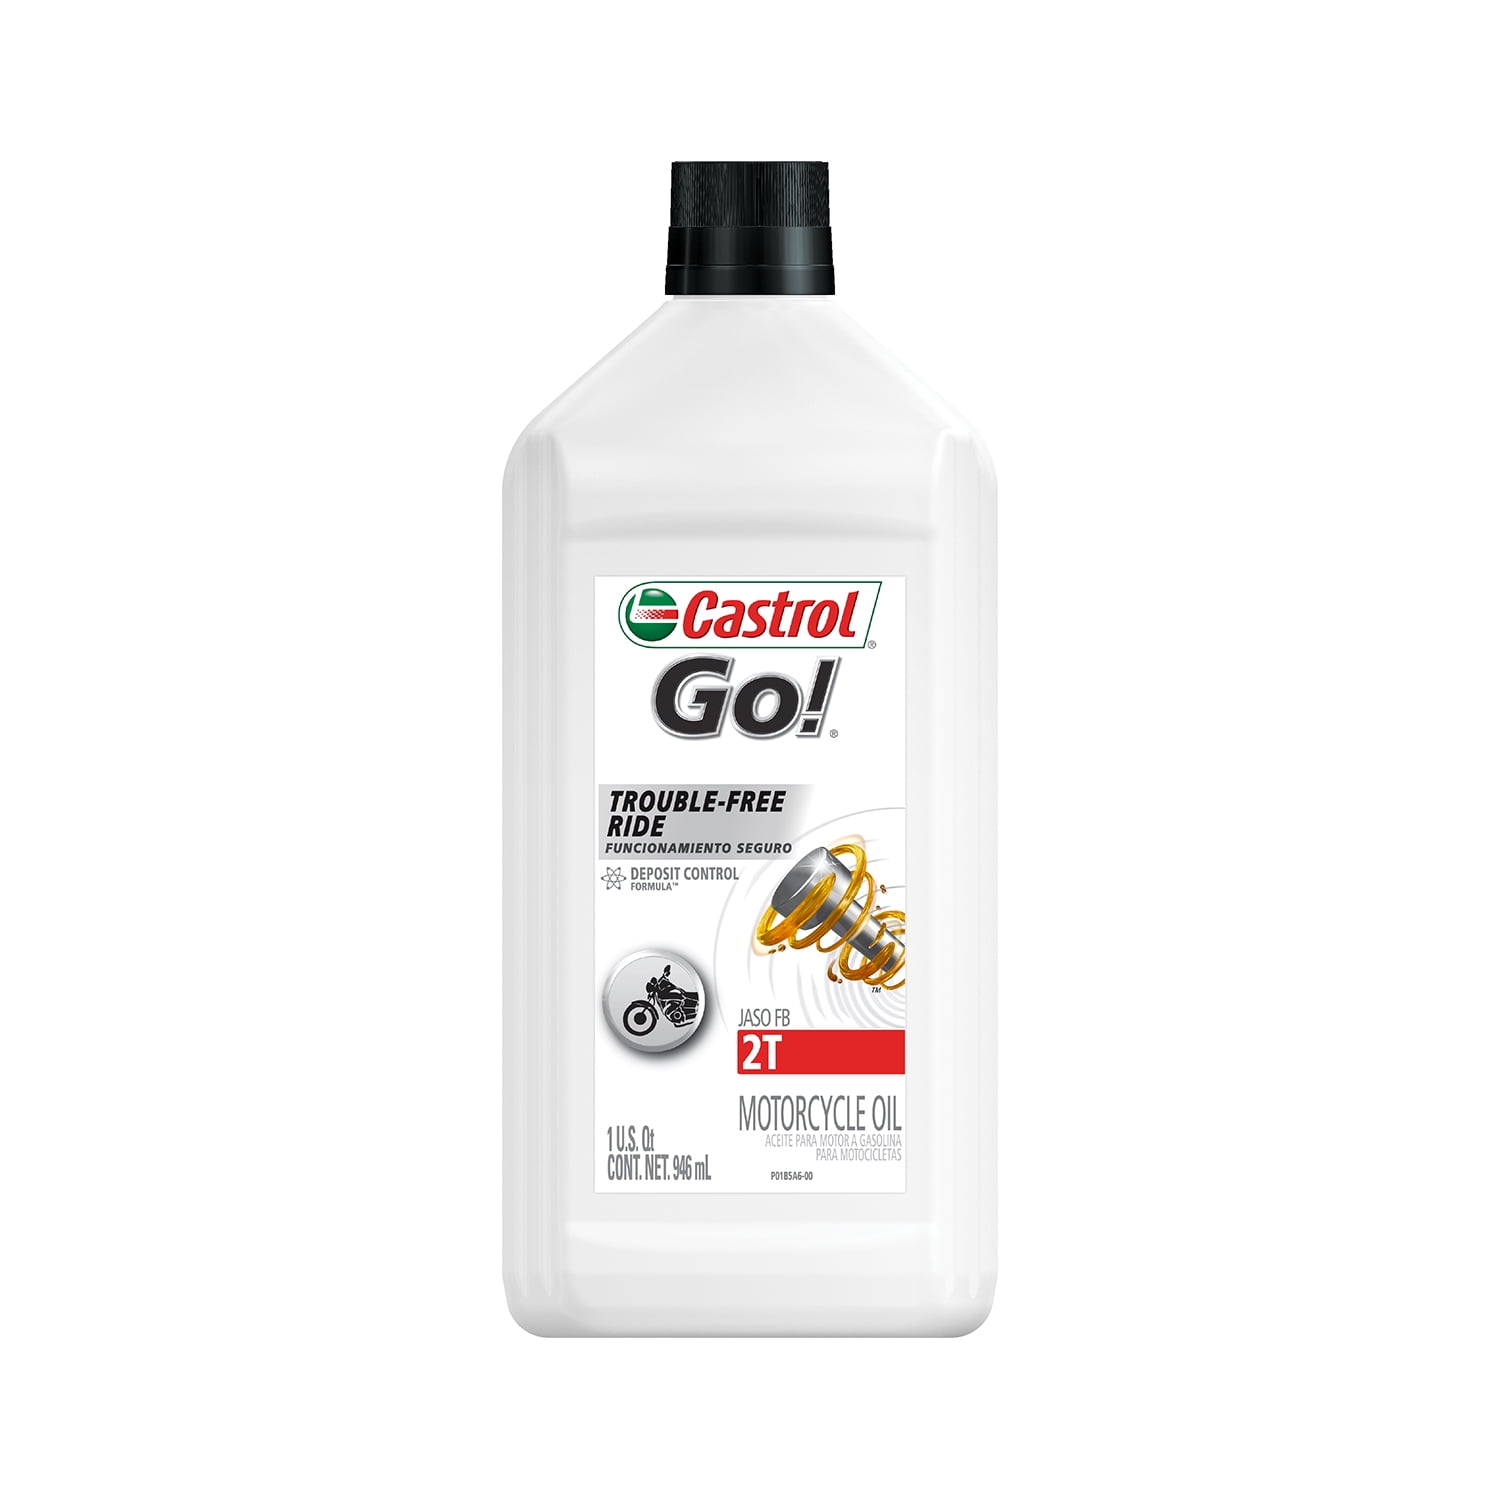 Castrol GO! 2T Conventional Motorcycle Oil, 1 Quart